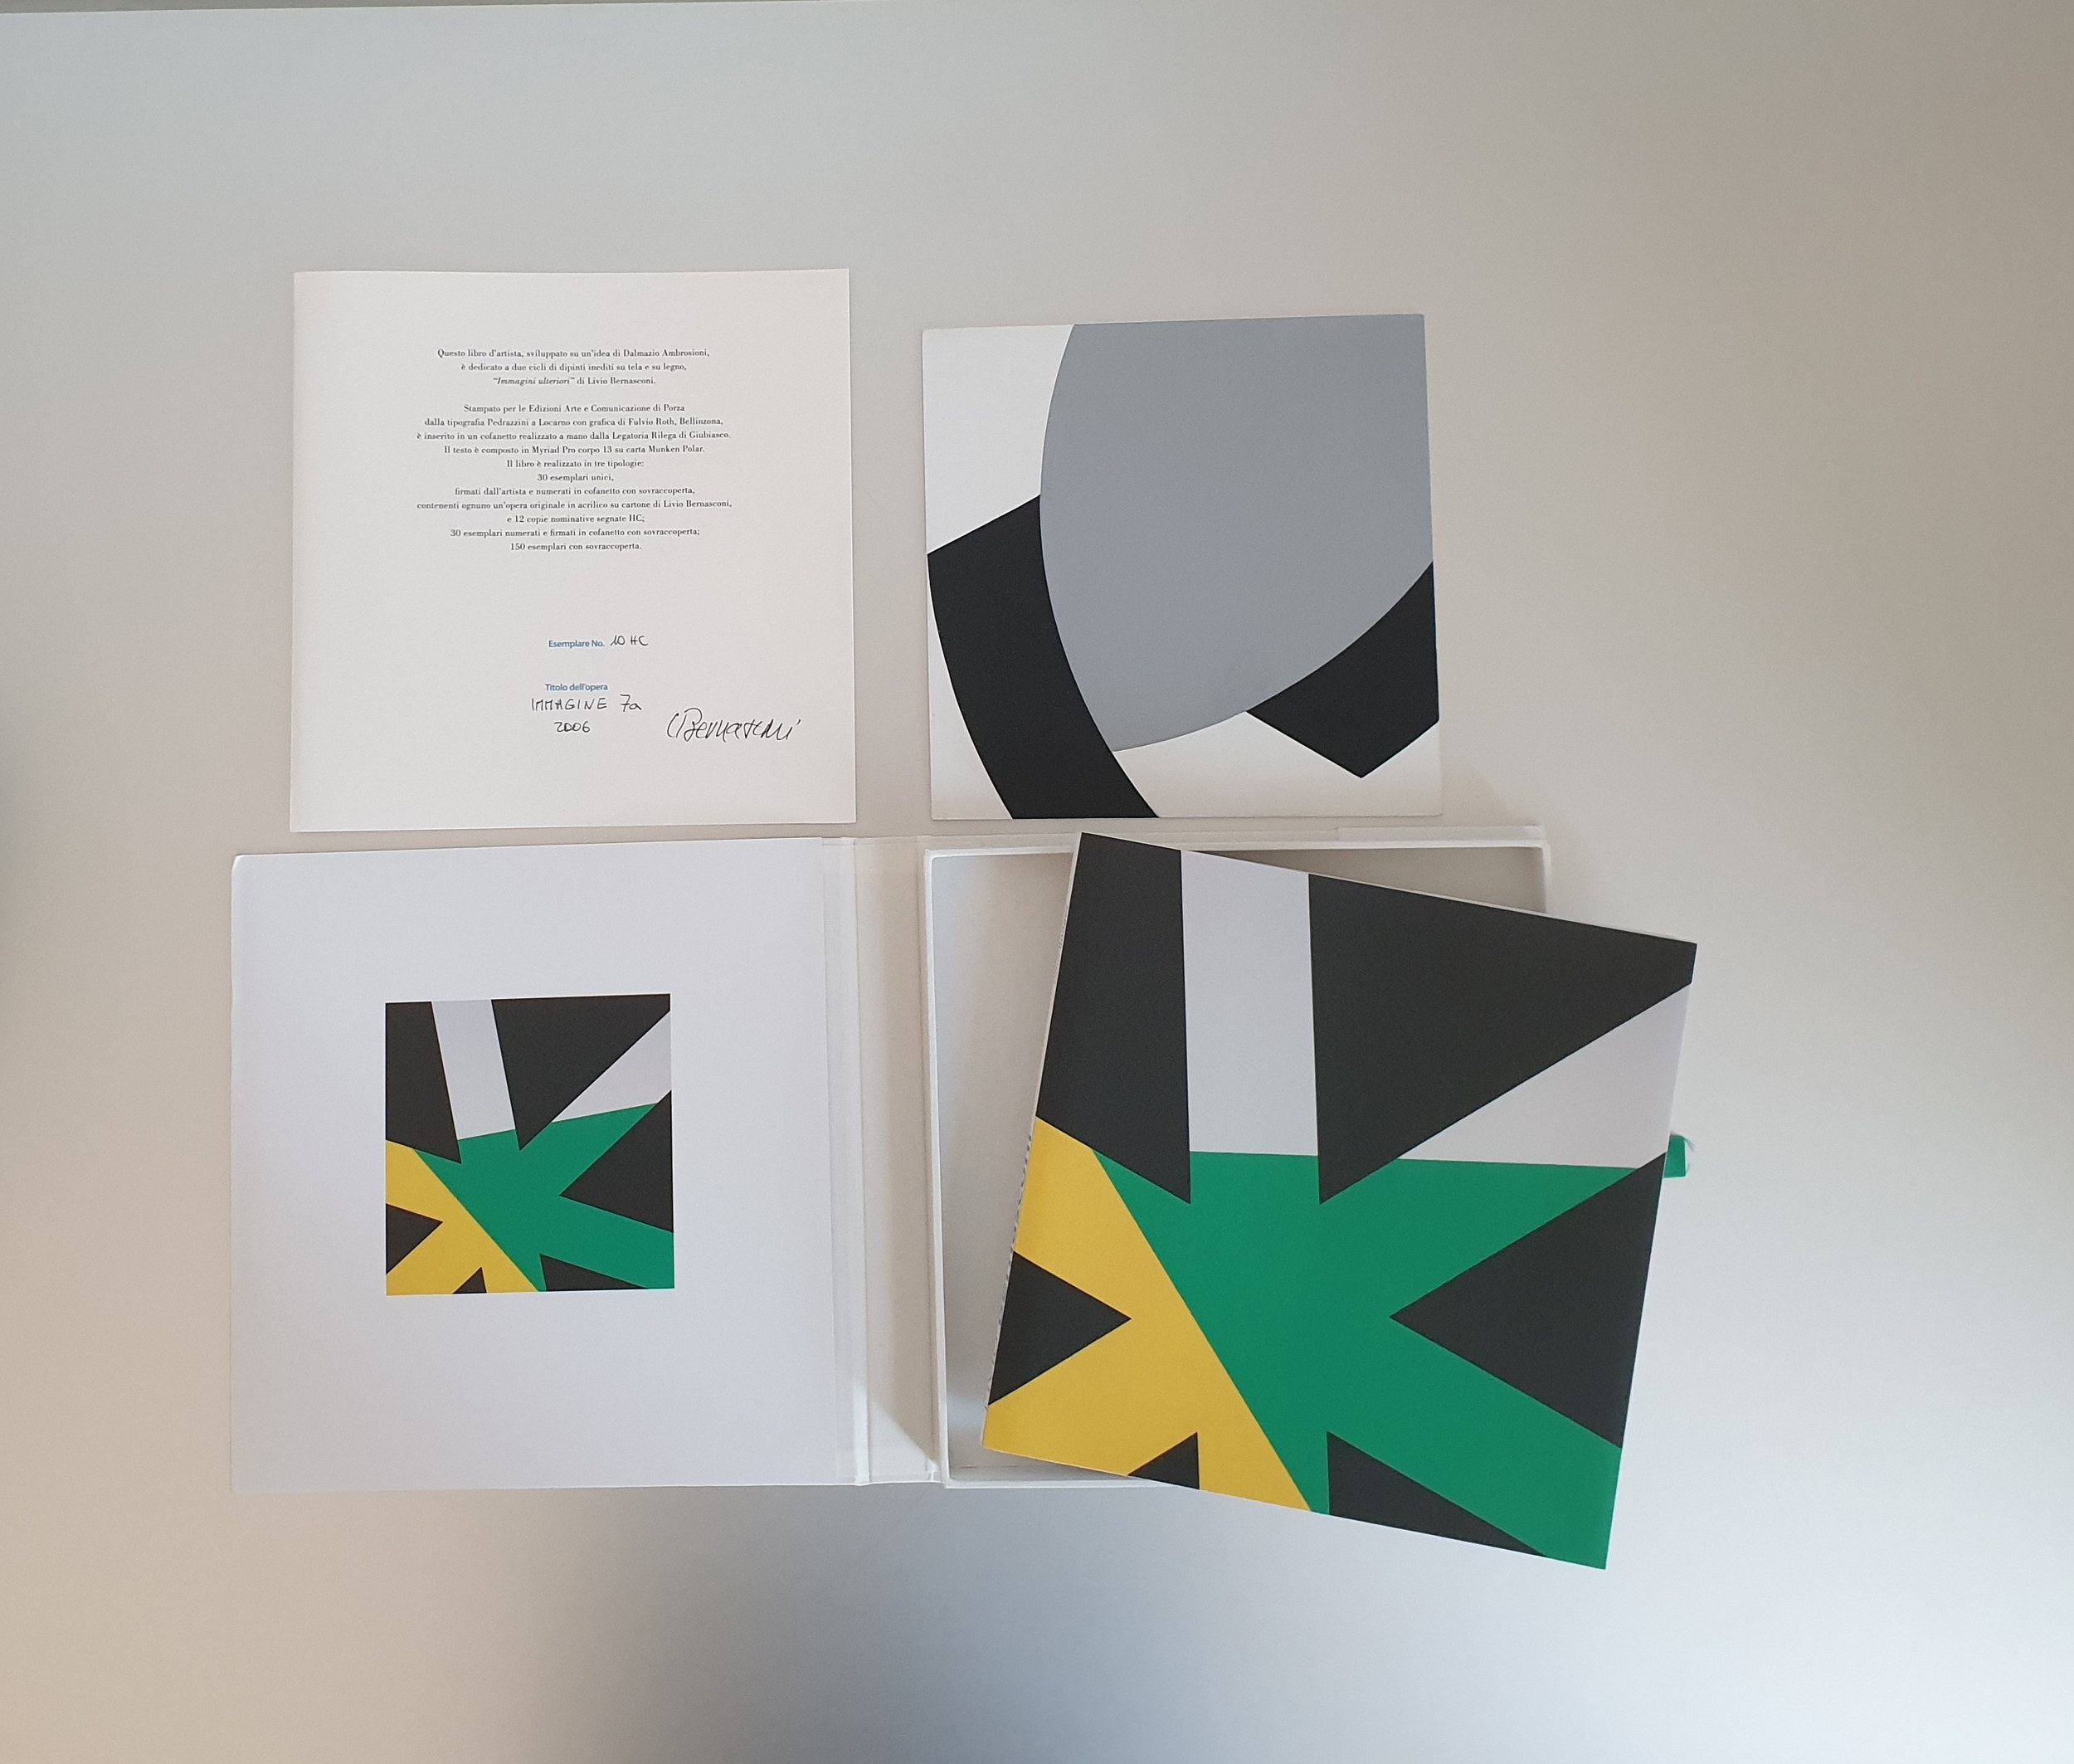 Livio Bernasconi – 30 copies of artist’s book bound by hand, all numbered and signed by the artist